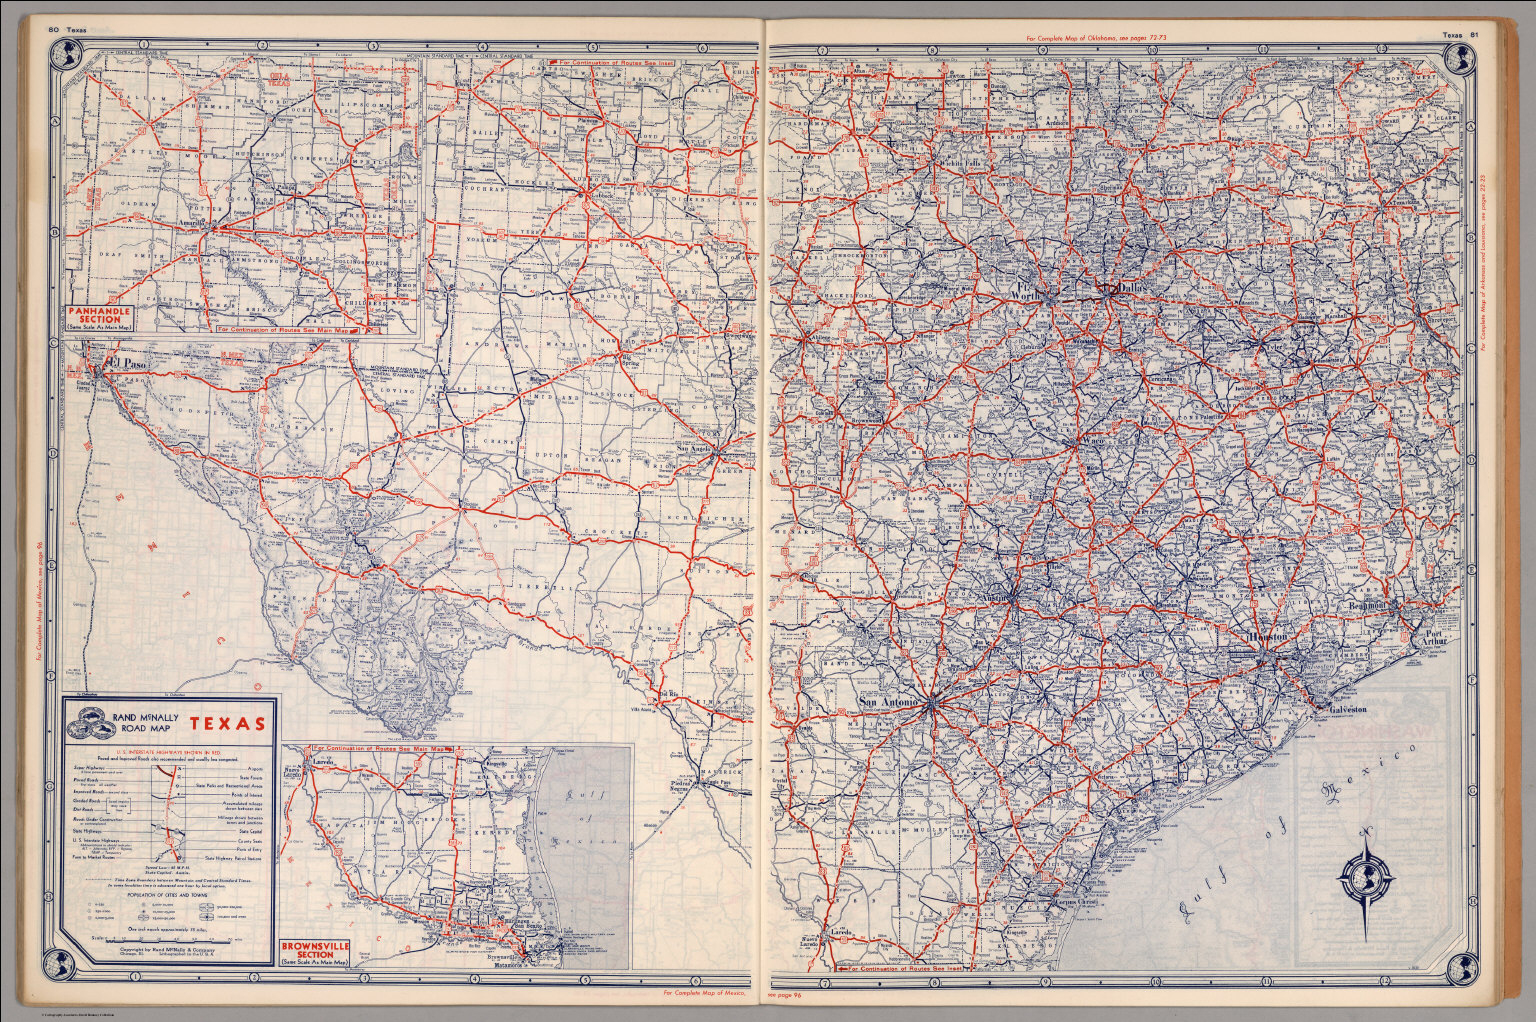 Road Map Of Texas - David Rumsey Historical Map Collection - South Texas Road Map